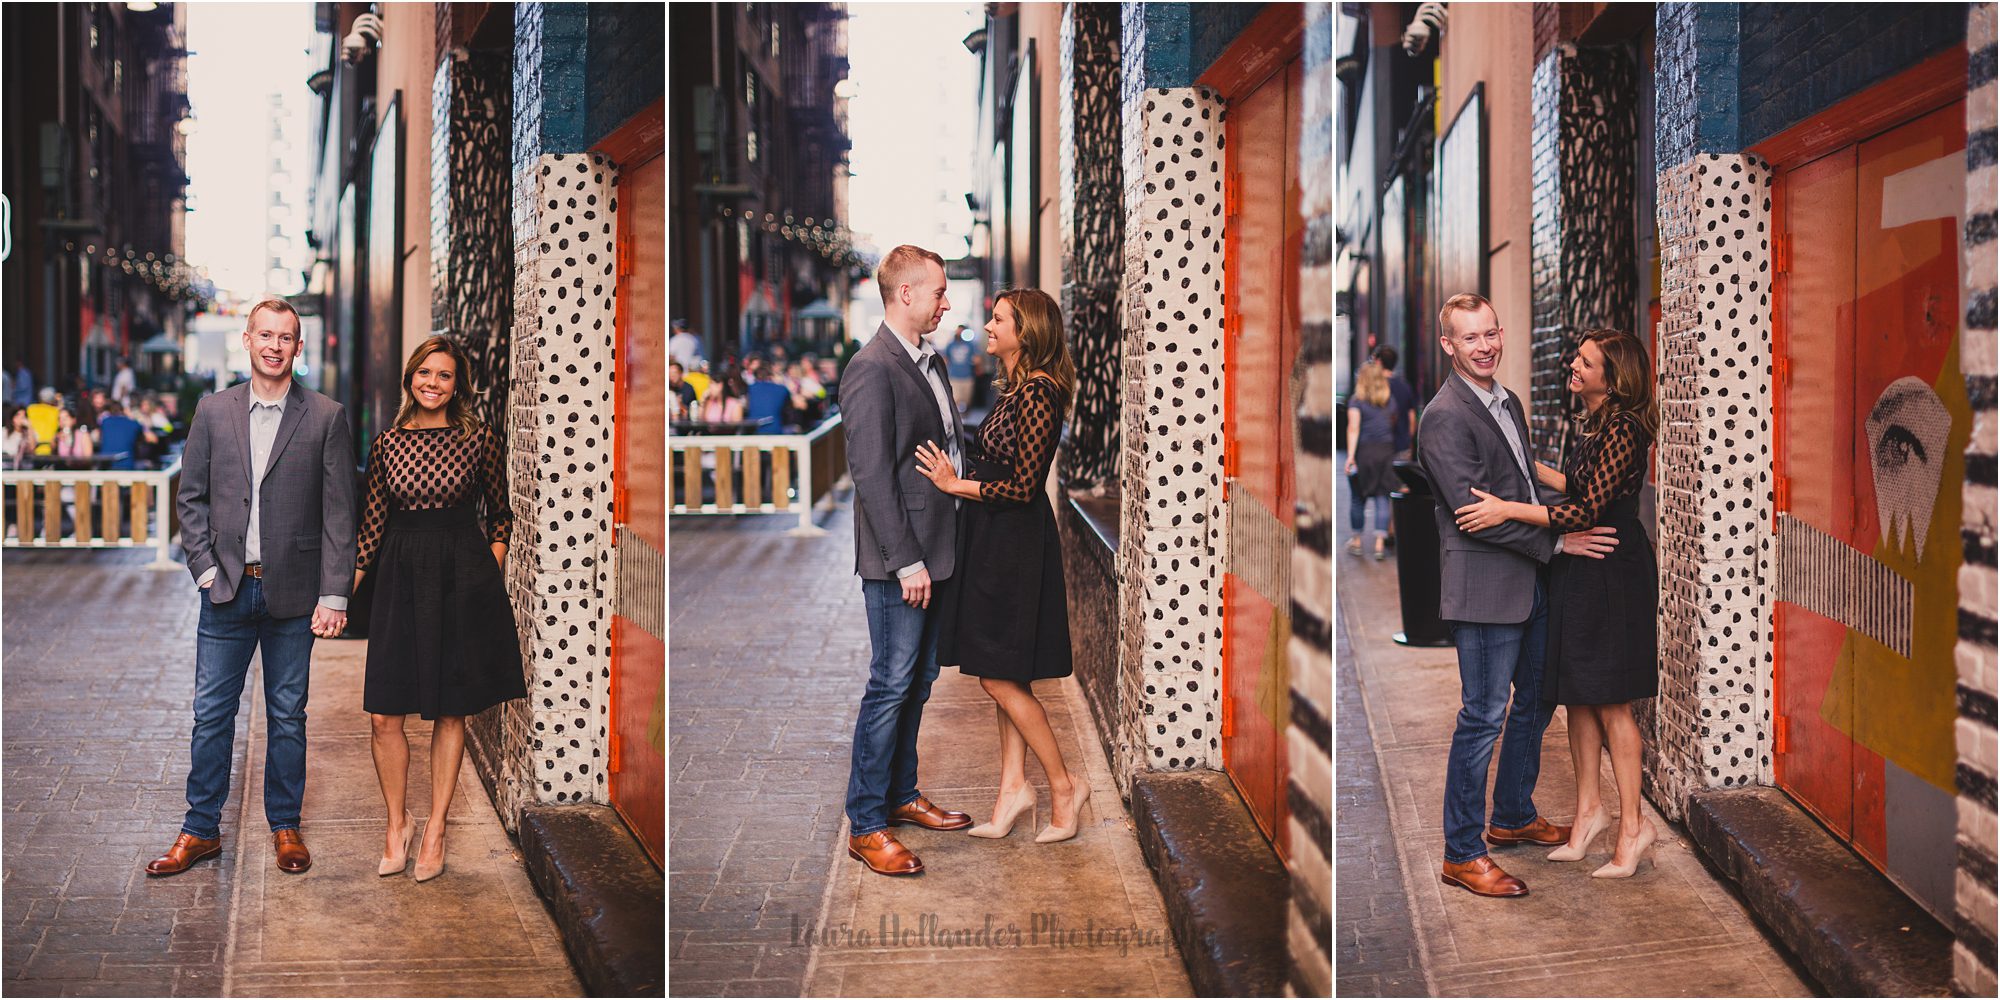 engagement session at The Belt in Downtown Detroit, MI. Urban engagement photos with Laura Hollander Photography